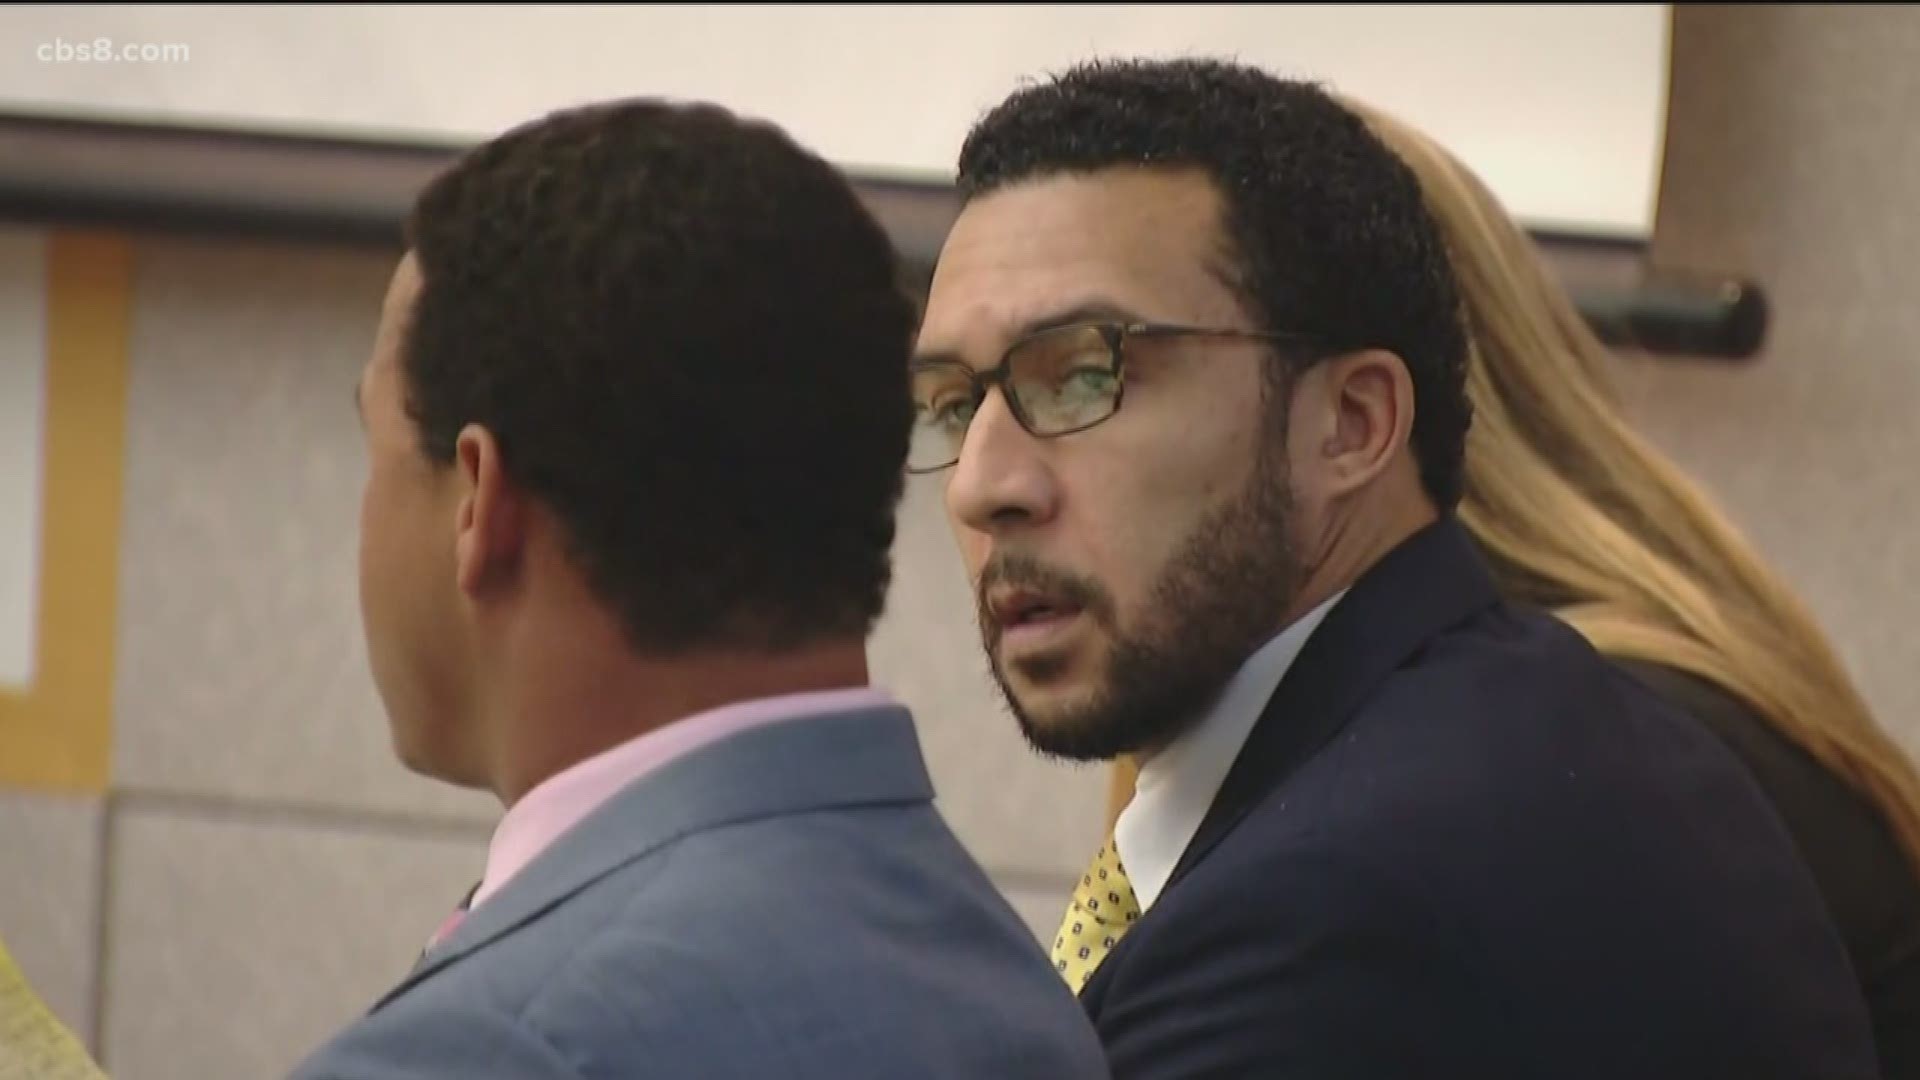 Kellen Winslow II seemed stunned as a jury found him guilty of raping a 58-year old homeless woman back in 2018. While Monday was a major development, it's just the beginning as the jury could only reach four of 12 verdicts.